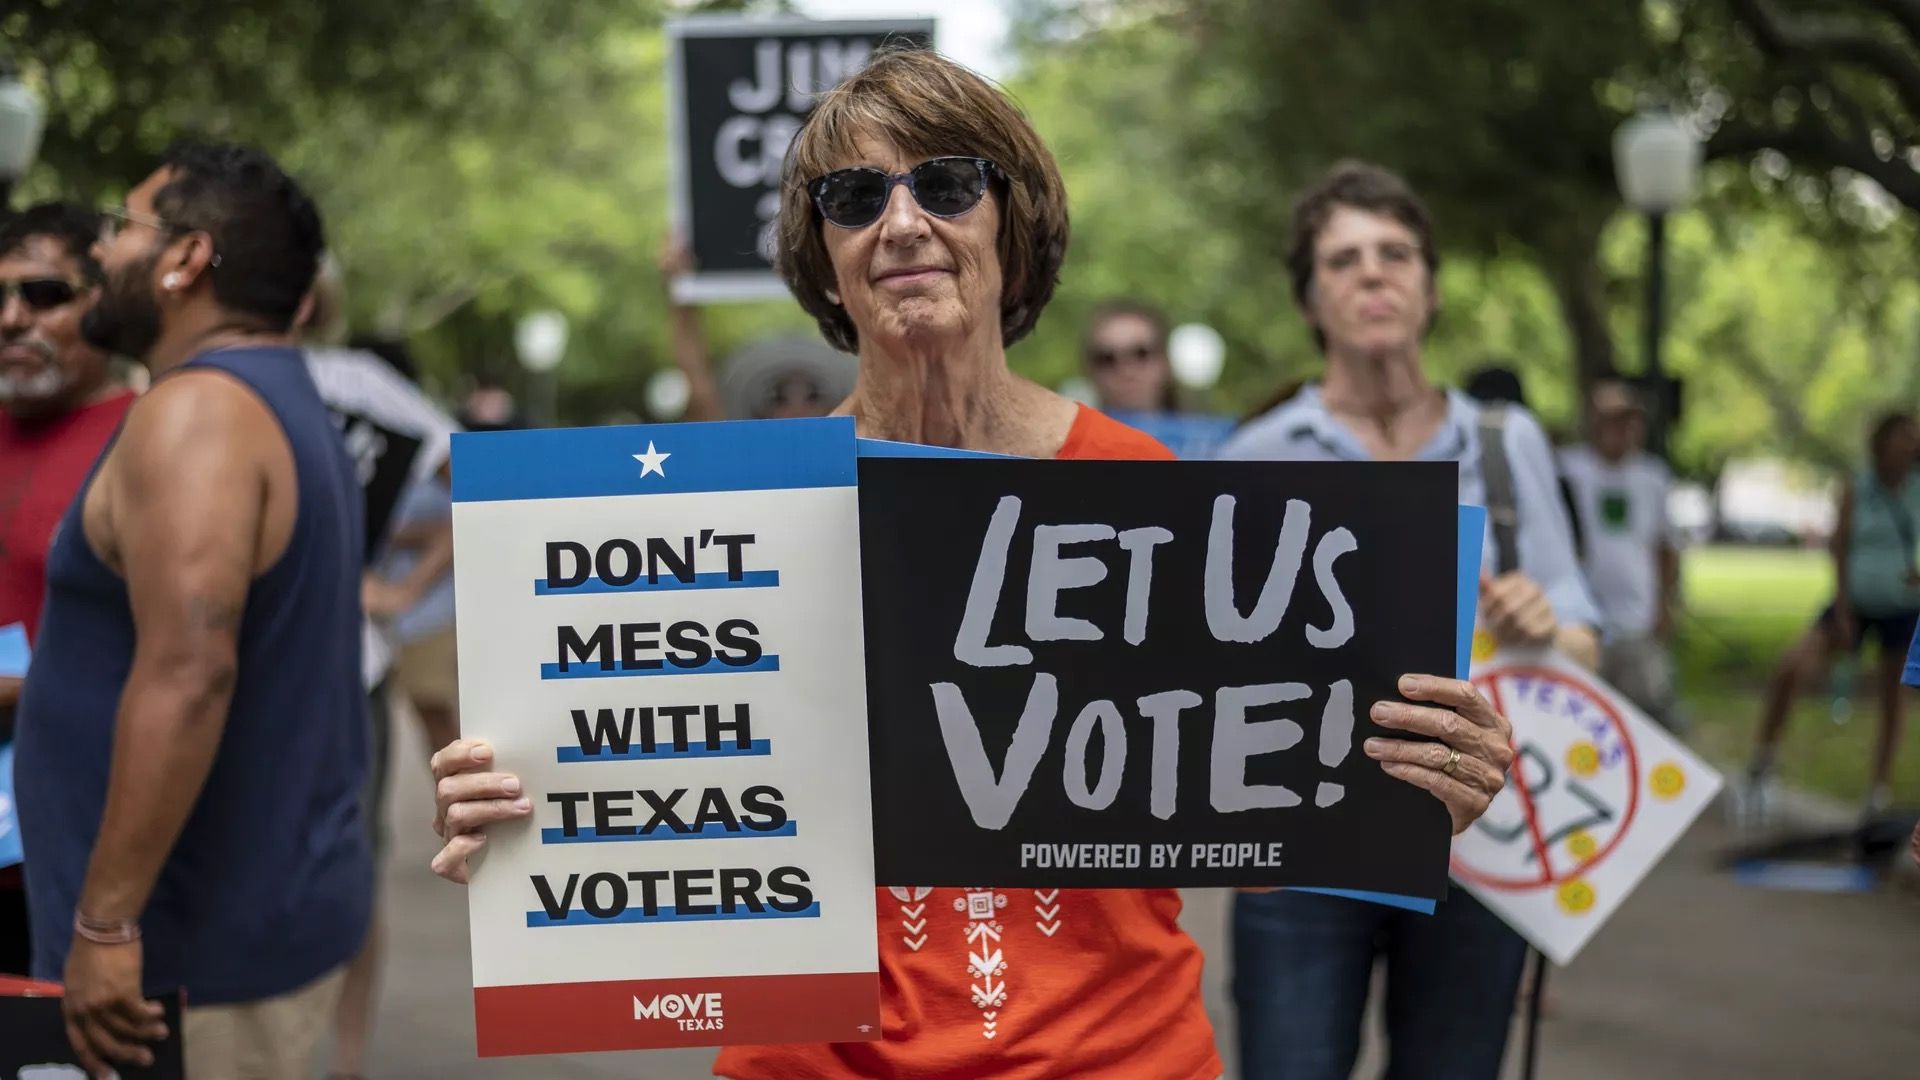 A woman is seen holding a sign at a Texas voting rights rally.